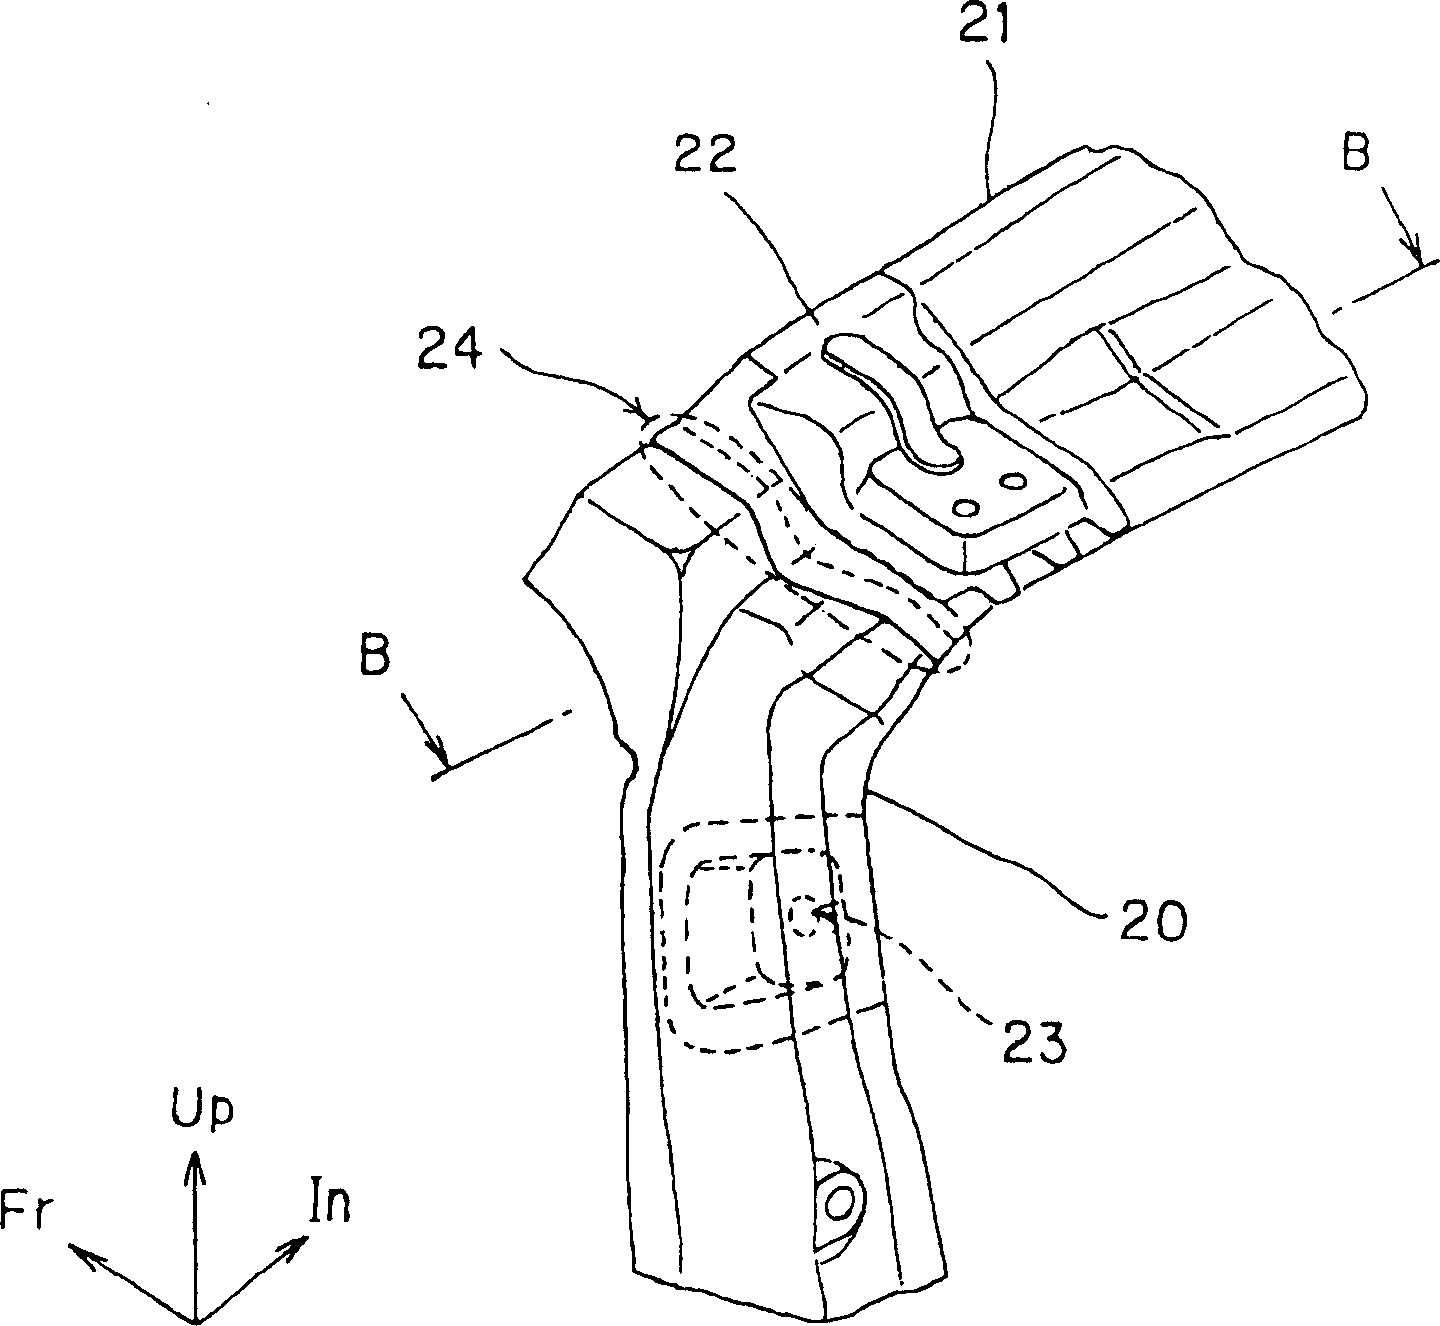 Rear body structure of vehicle